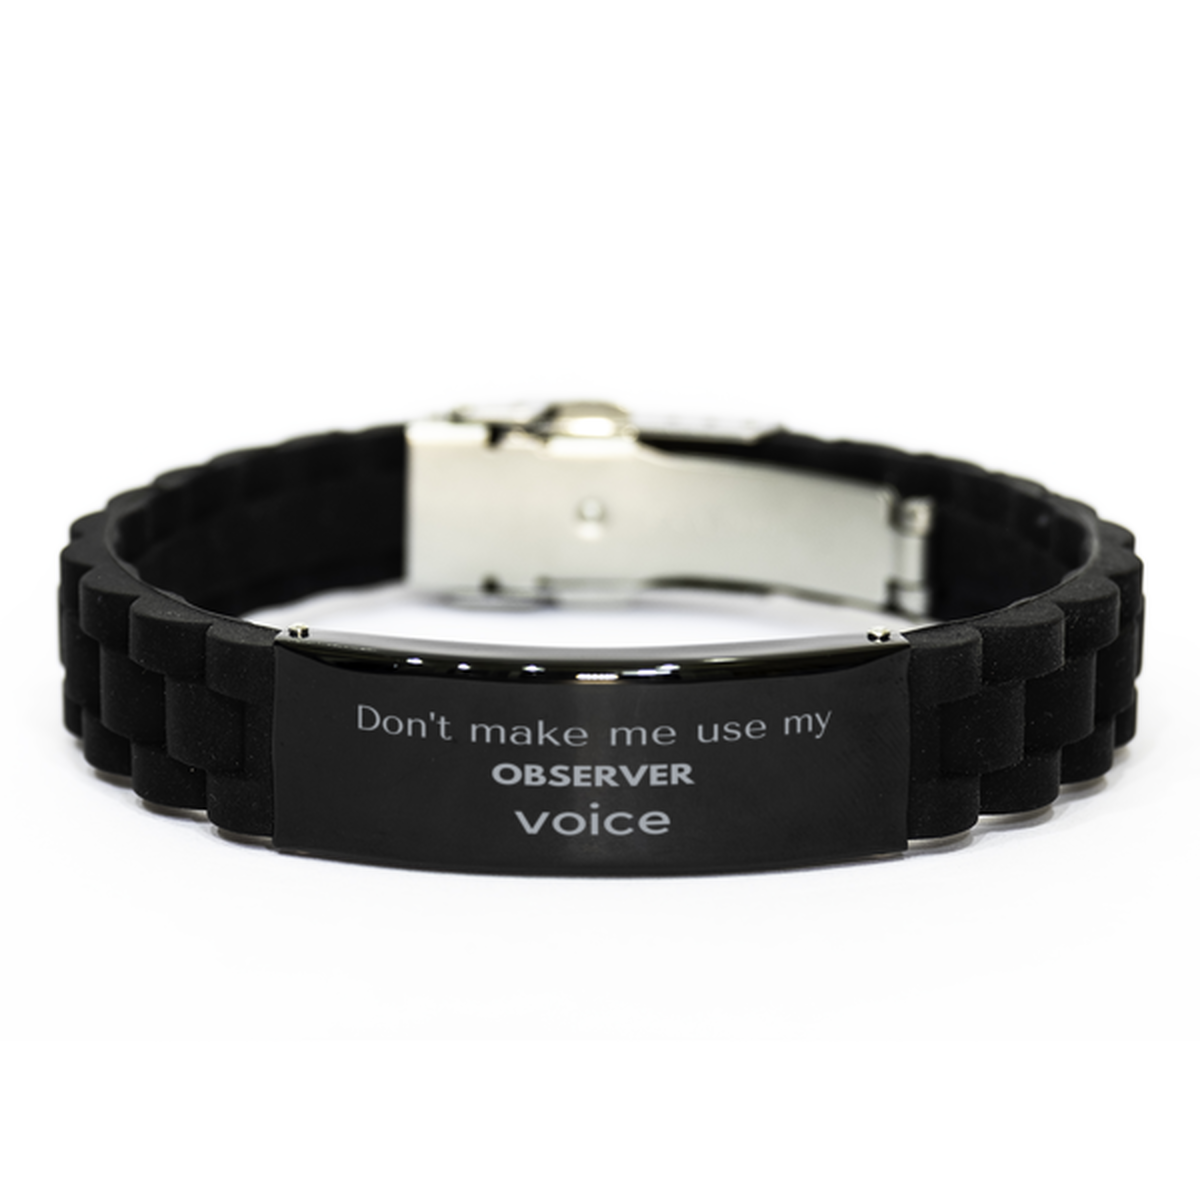 Don't make me use my Observer voice, Sarcasm Observer Gifts, Christmas Observer Black Glidelock Clasp Bracelet Birthday Unique Gifts For Observer Coworkers, Men, Women, Colleague, Friends